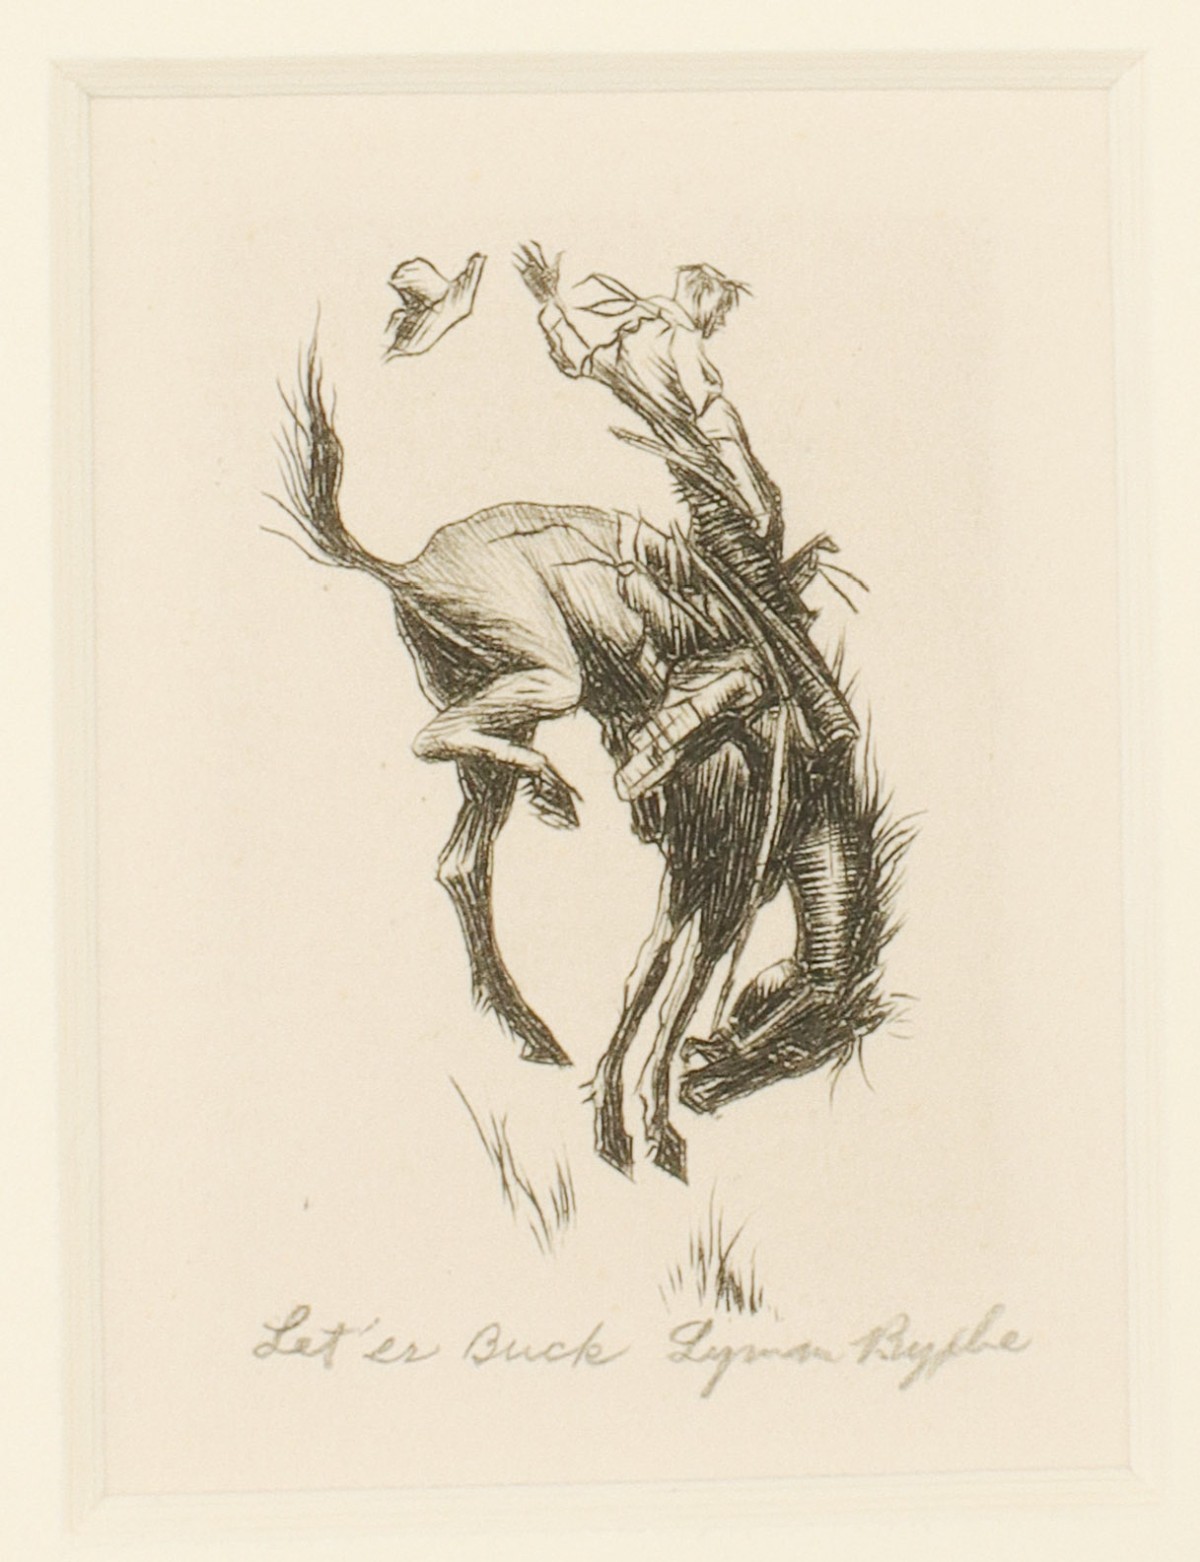 LYMAN BYXBE (1886-1980) PENCIL SIGNED ENGRAVING